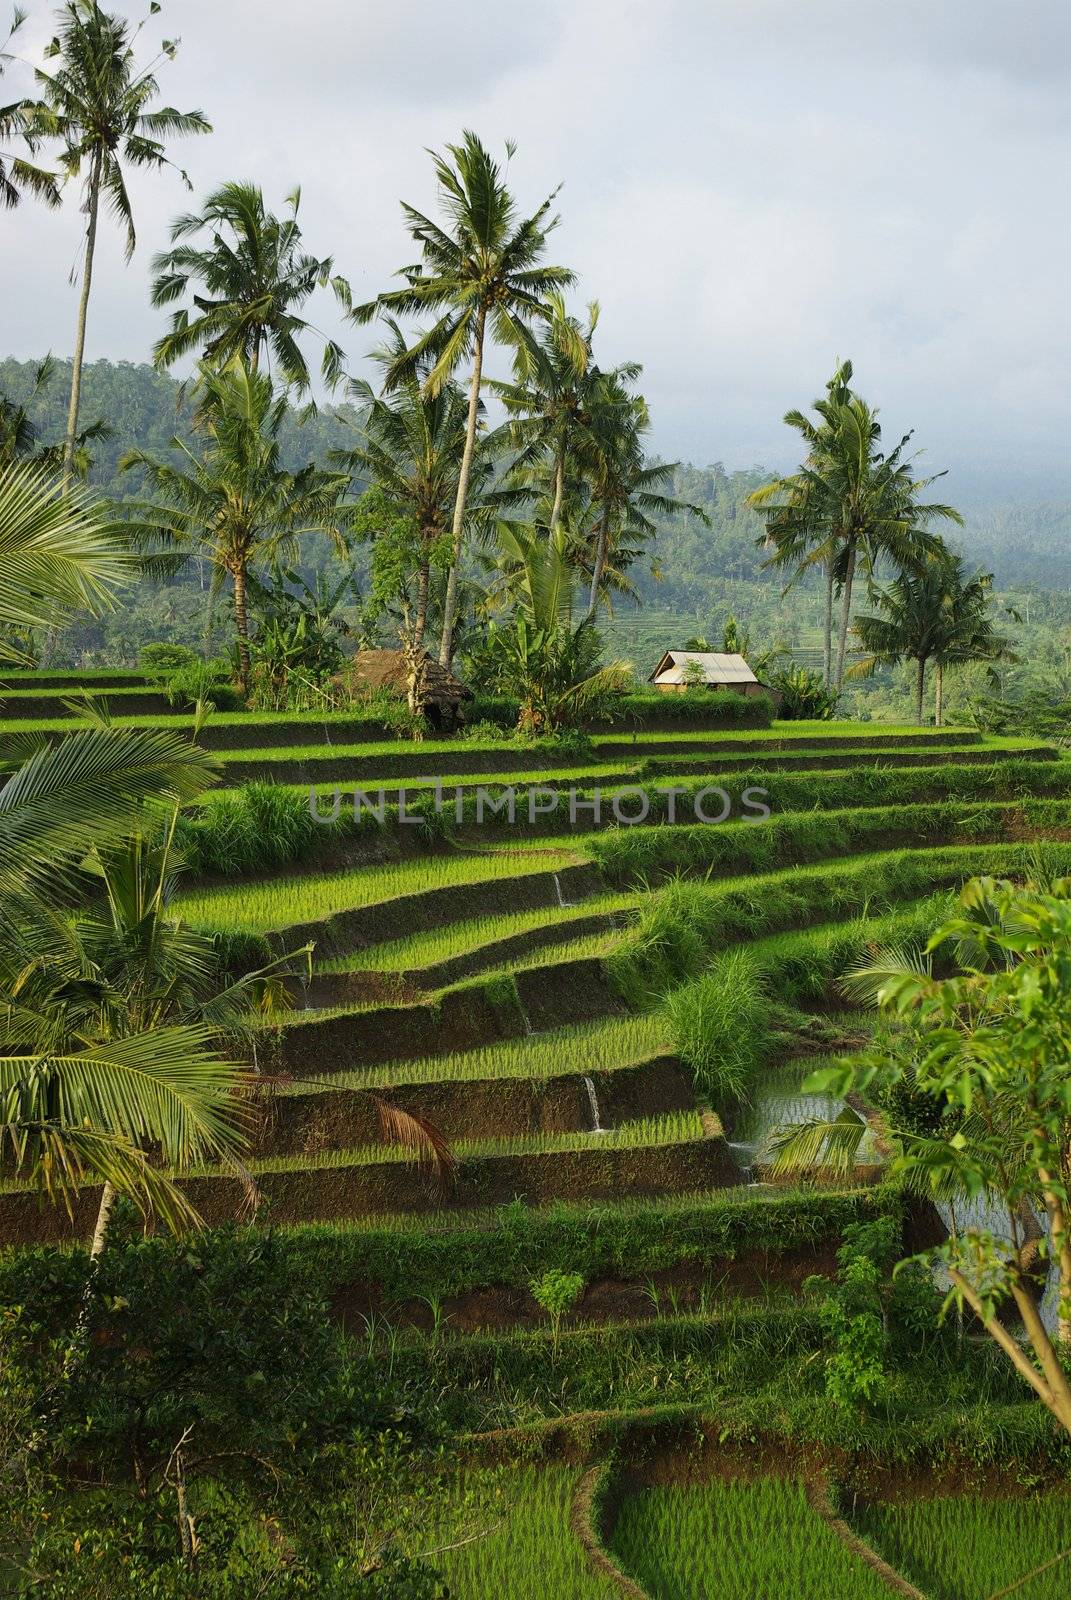 Landscape of young watered ricefield with some coconut palm and a little hut in Bali island